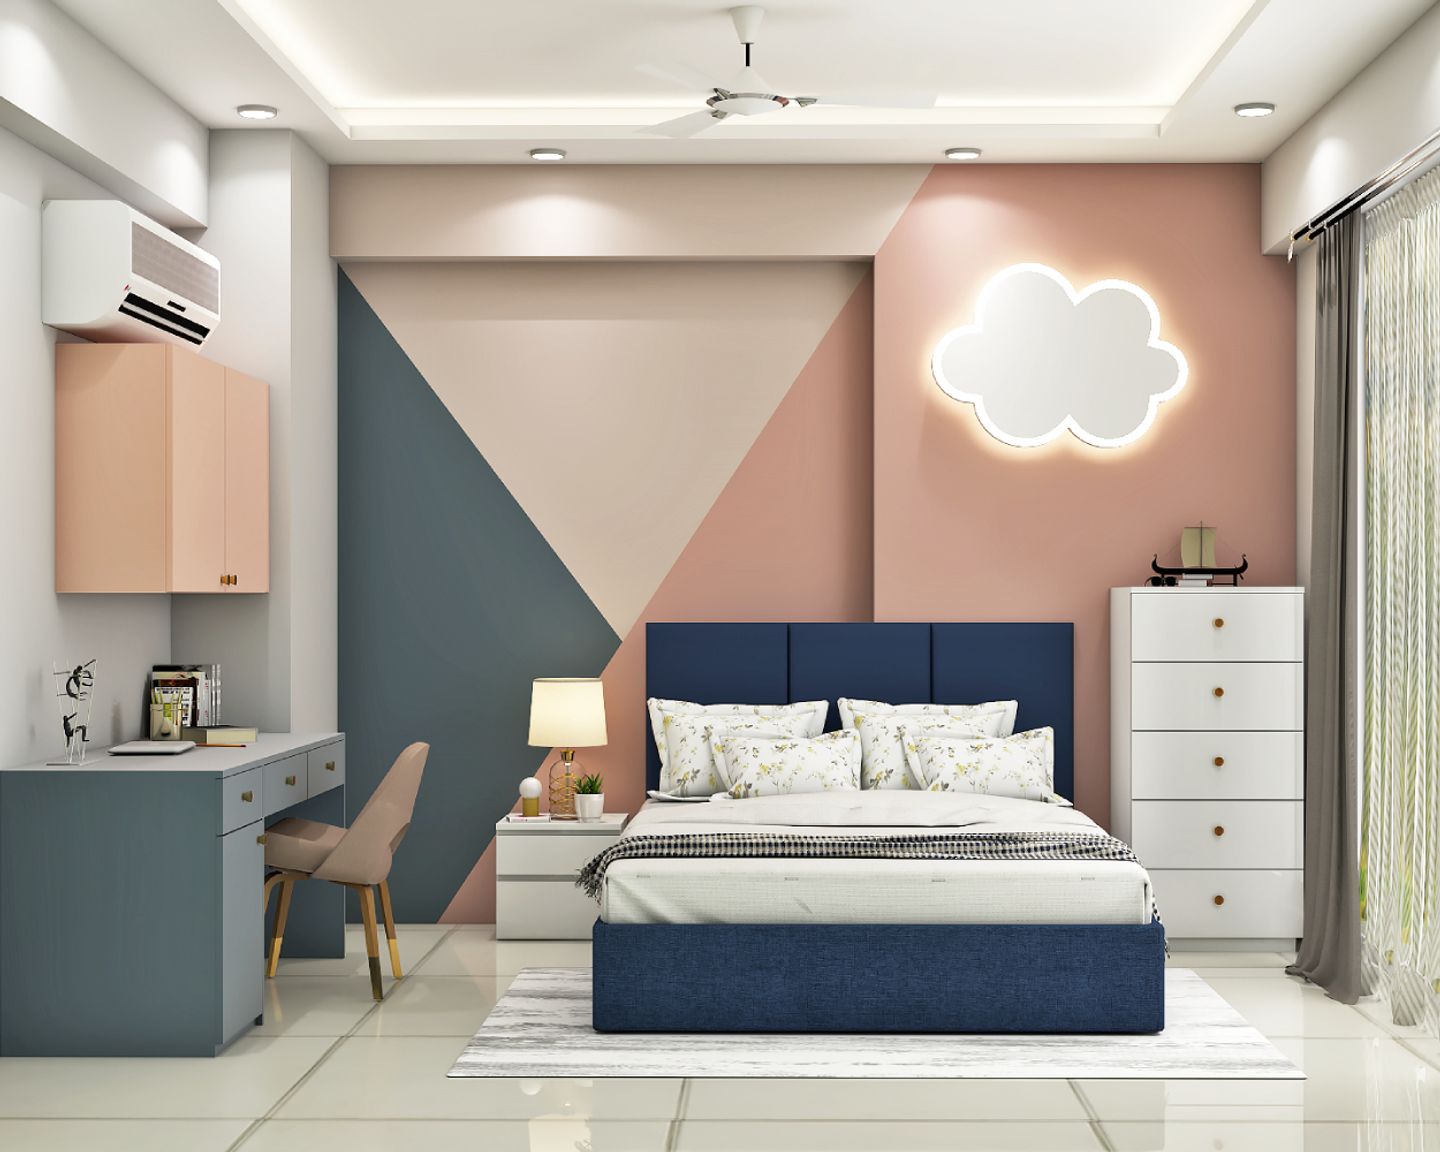 Tri-Toned Wall Paint Design For Kids Bedrooms - Livspace